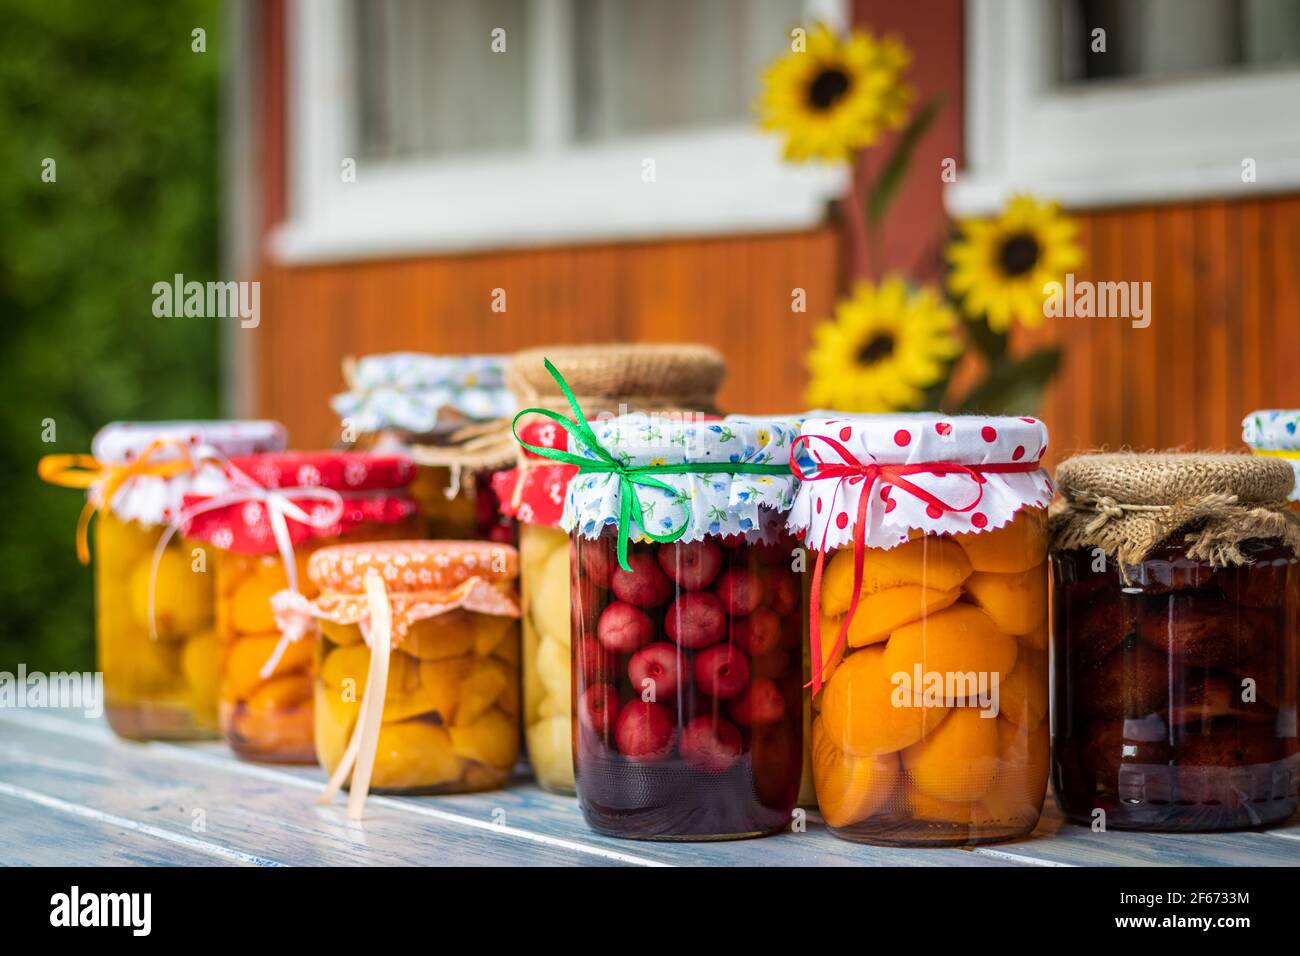 Variety of diferent fruit compote in jar. Homemade preserved food on table. Peach, apricot, cherry, apple, pear and plum compotes Stock Photo